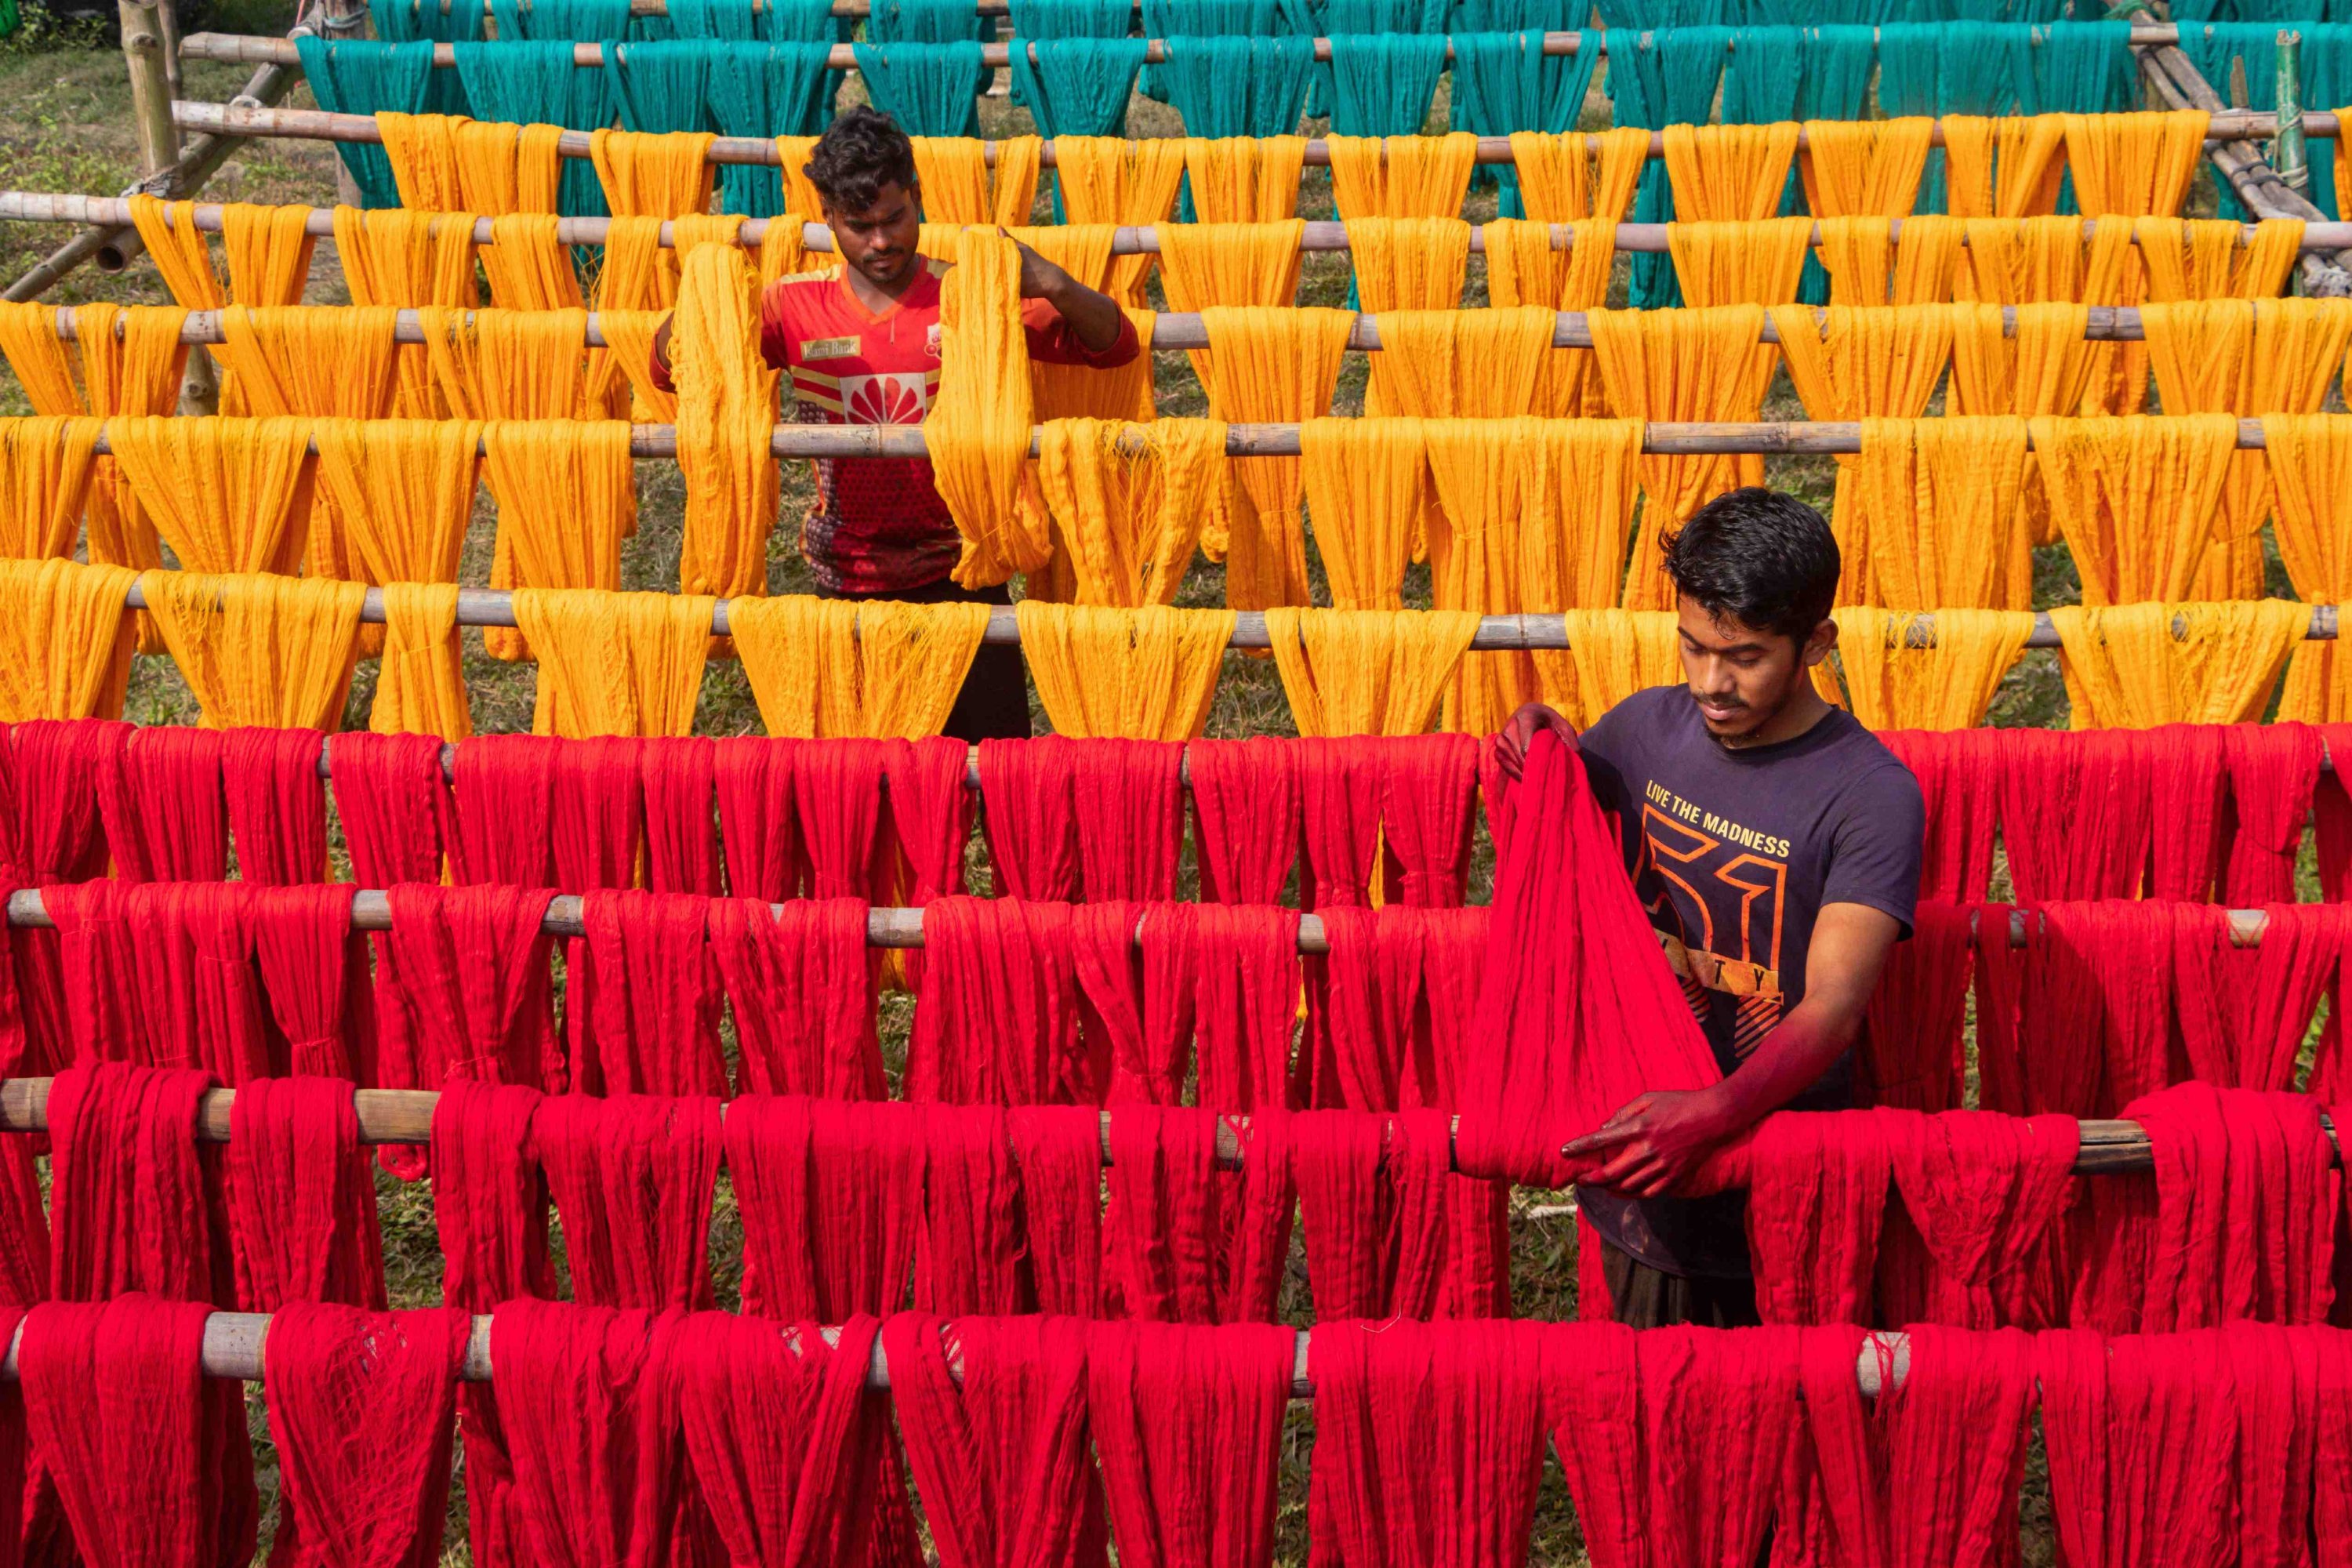 Workers hang freshly dyed threads on a wooden structure as they are being dried in the sunshine in Narayanganj, Bangladesh. (Getty Images Photo)